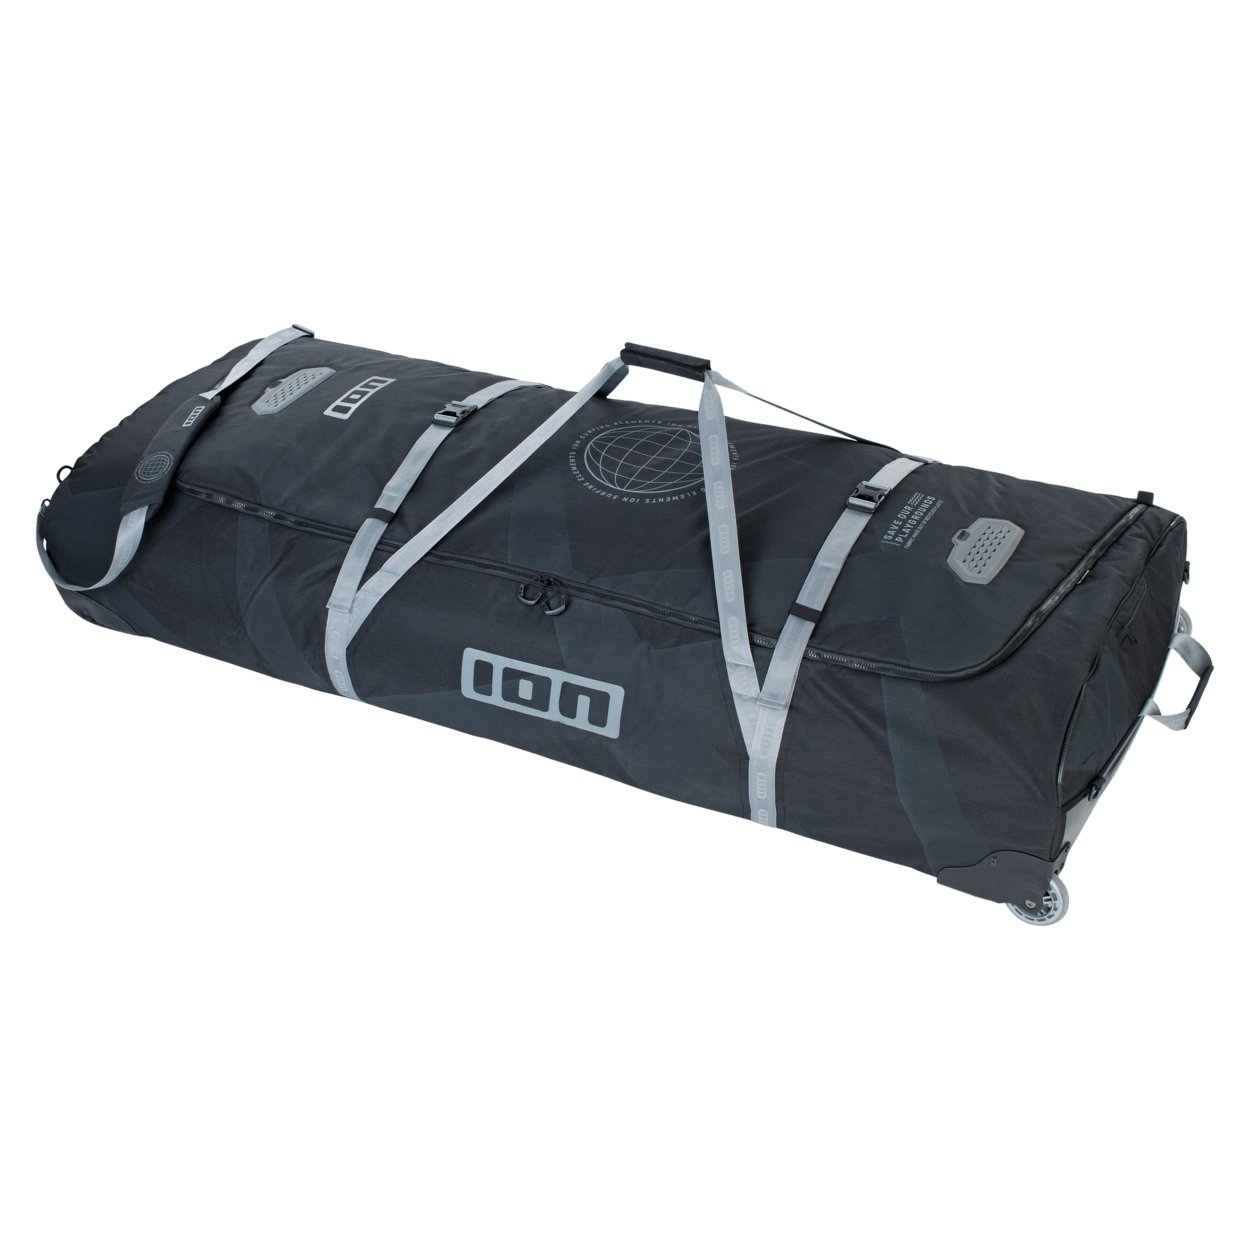 ION Gearbag Tec Wing and Kite Travel bag 2022 - Worthing Watersports - 9010583059778 - Bags - ION Water